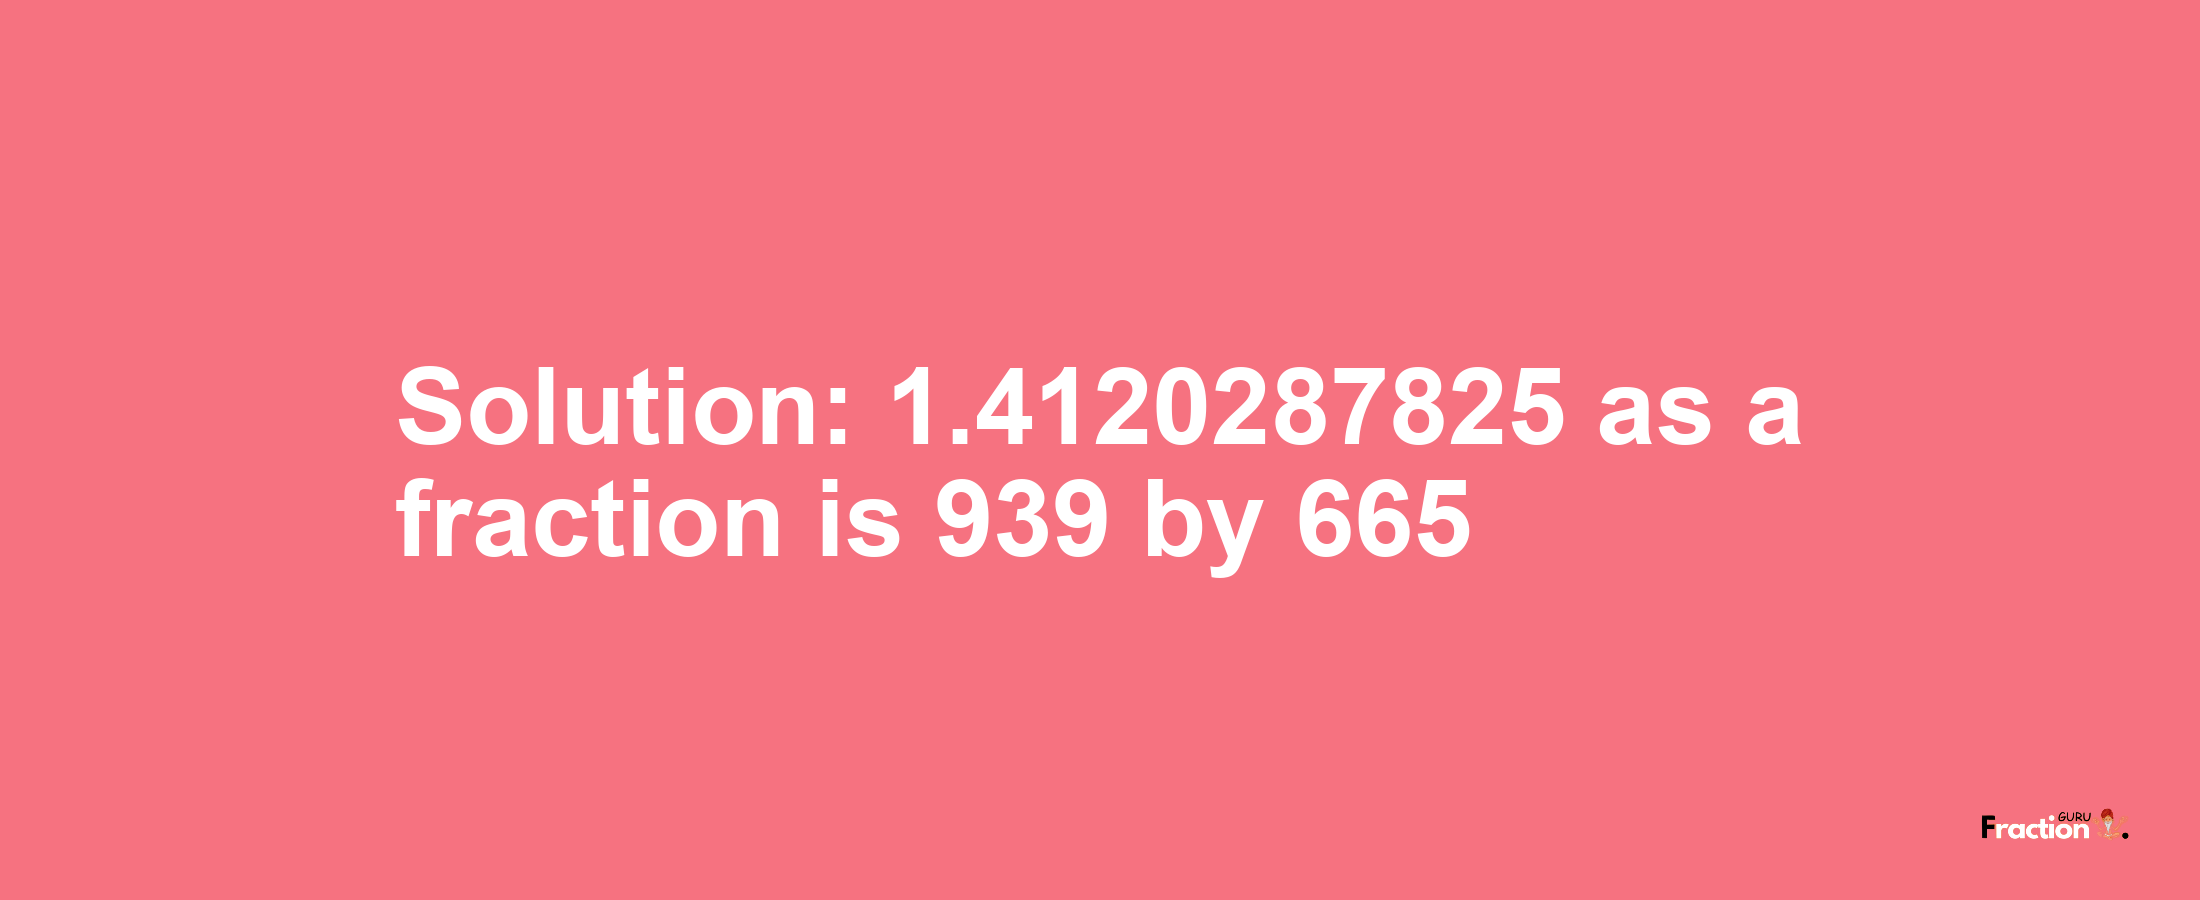 Solution:1.4120287825 as a fraction is 939/665